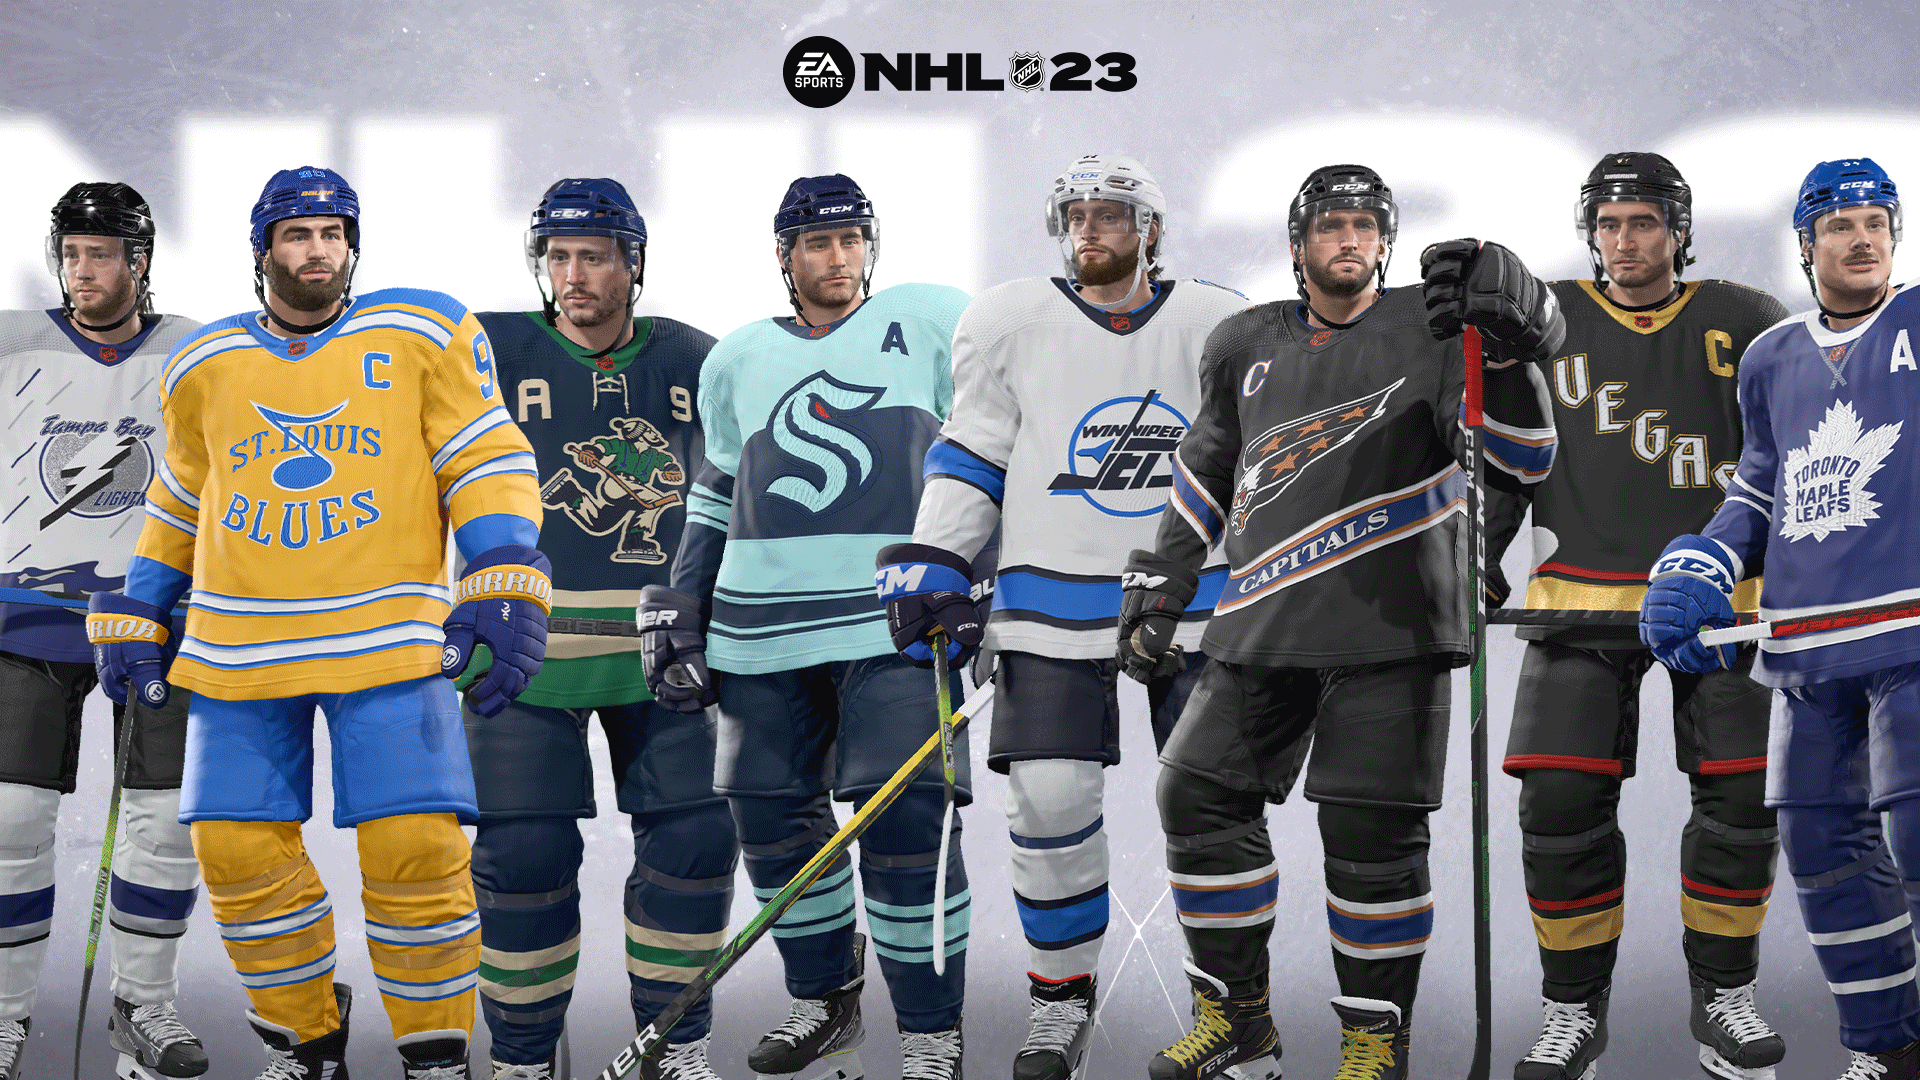 Chris Creamer  SportsLogos.Net on X: Playing catchup The #NHL revealed  the uniforms their 2022 All-Stars will be wearing when they take the ice  two weeks from now in Las Vegas! My